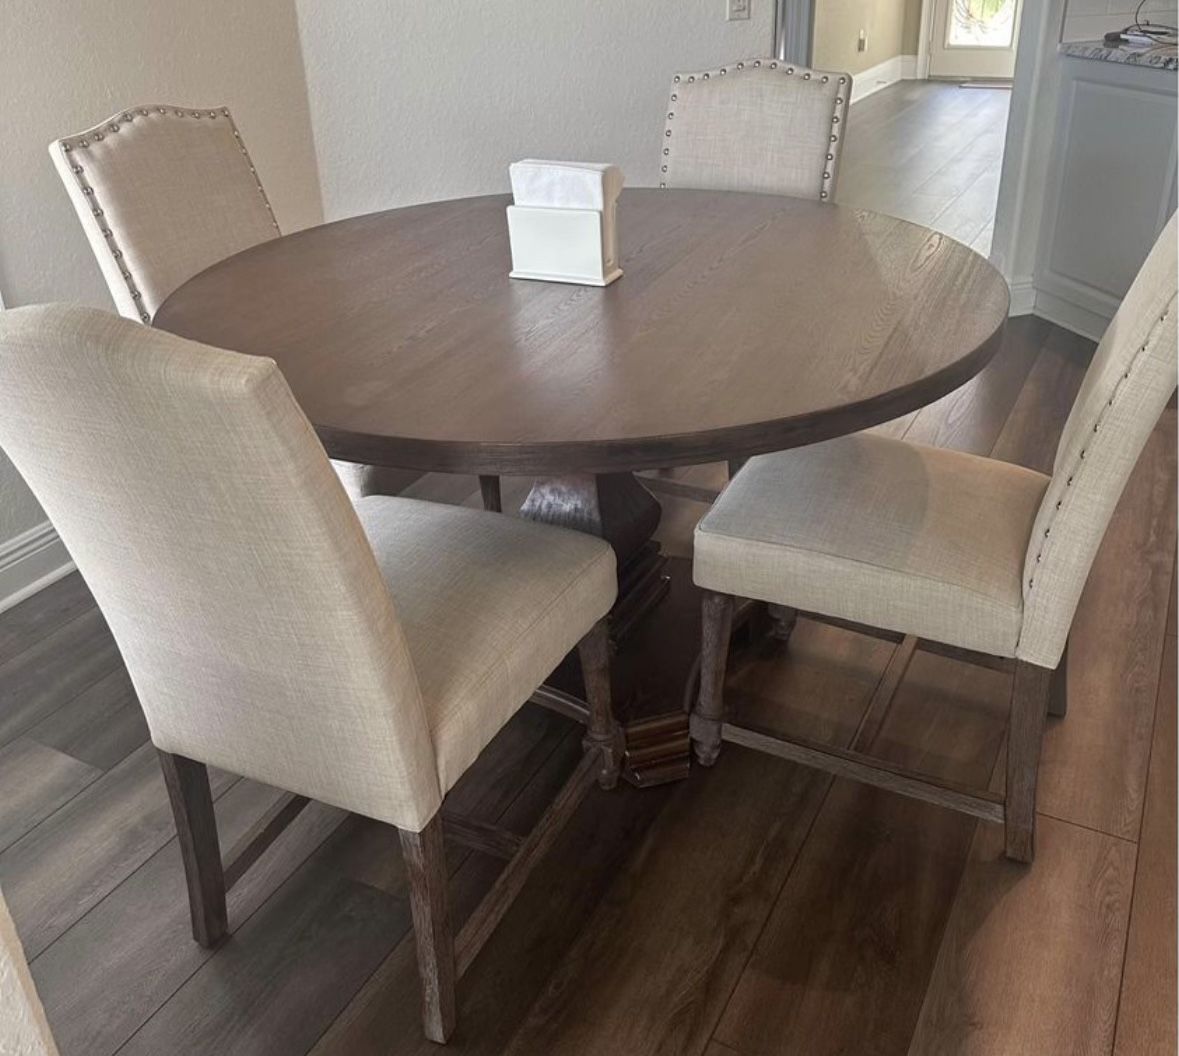 Kitchen Or Dining Table Set